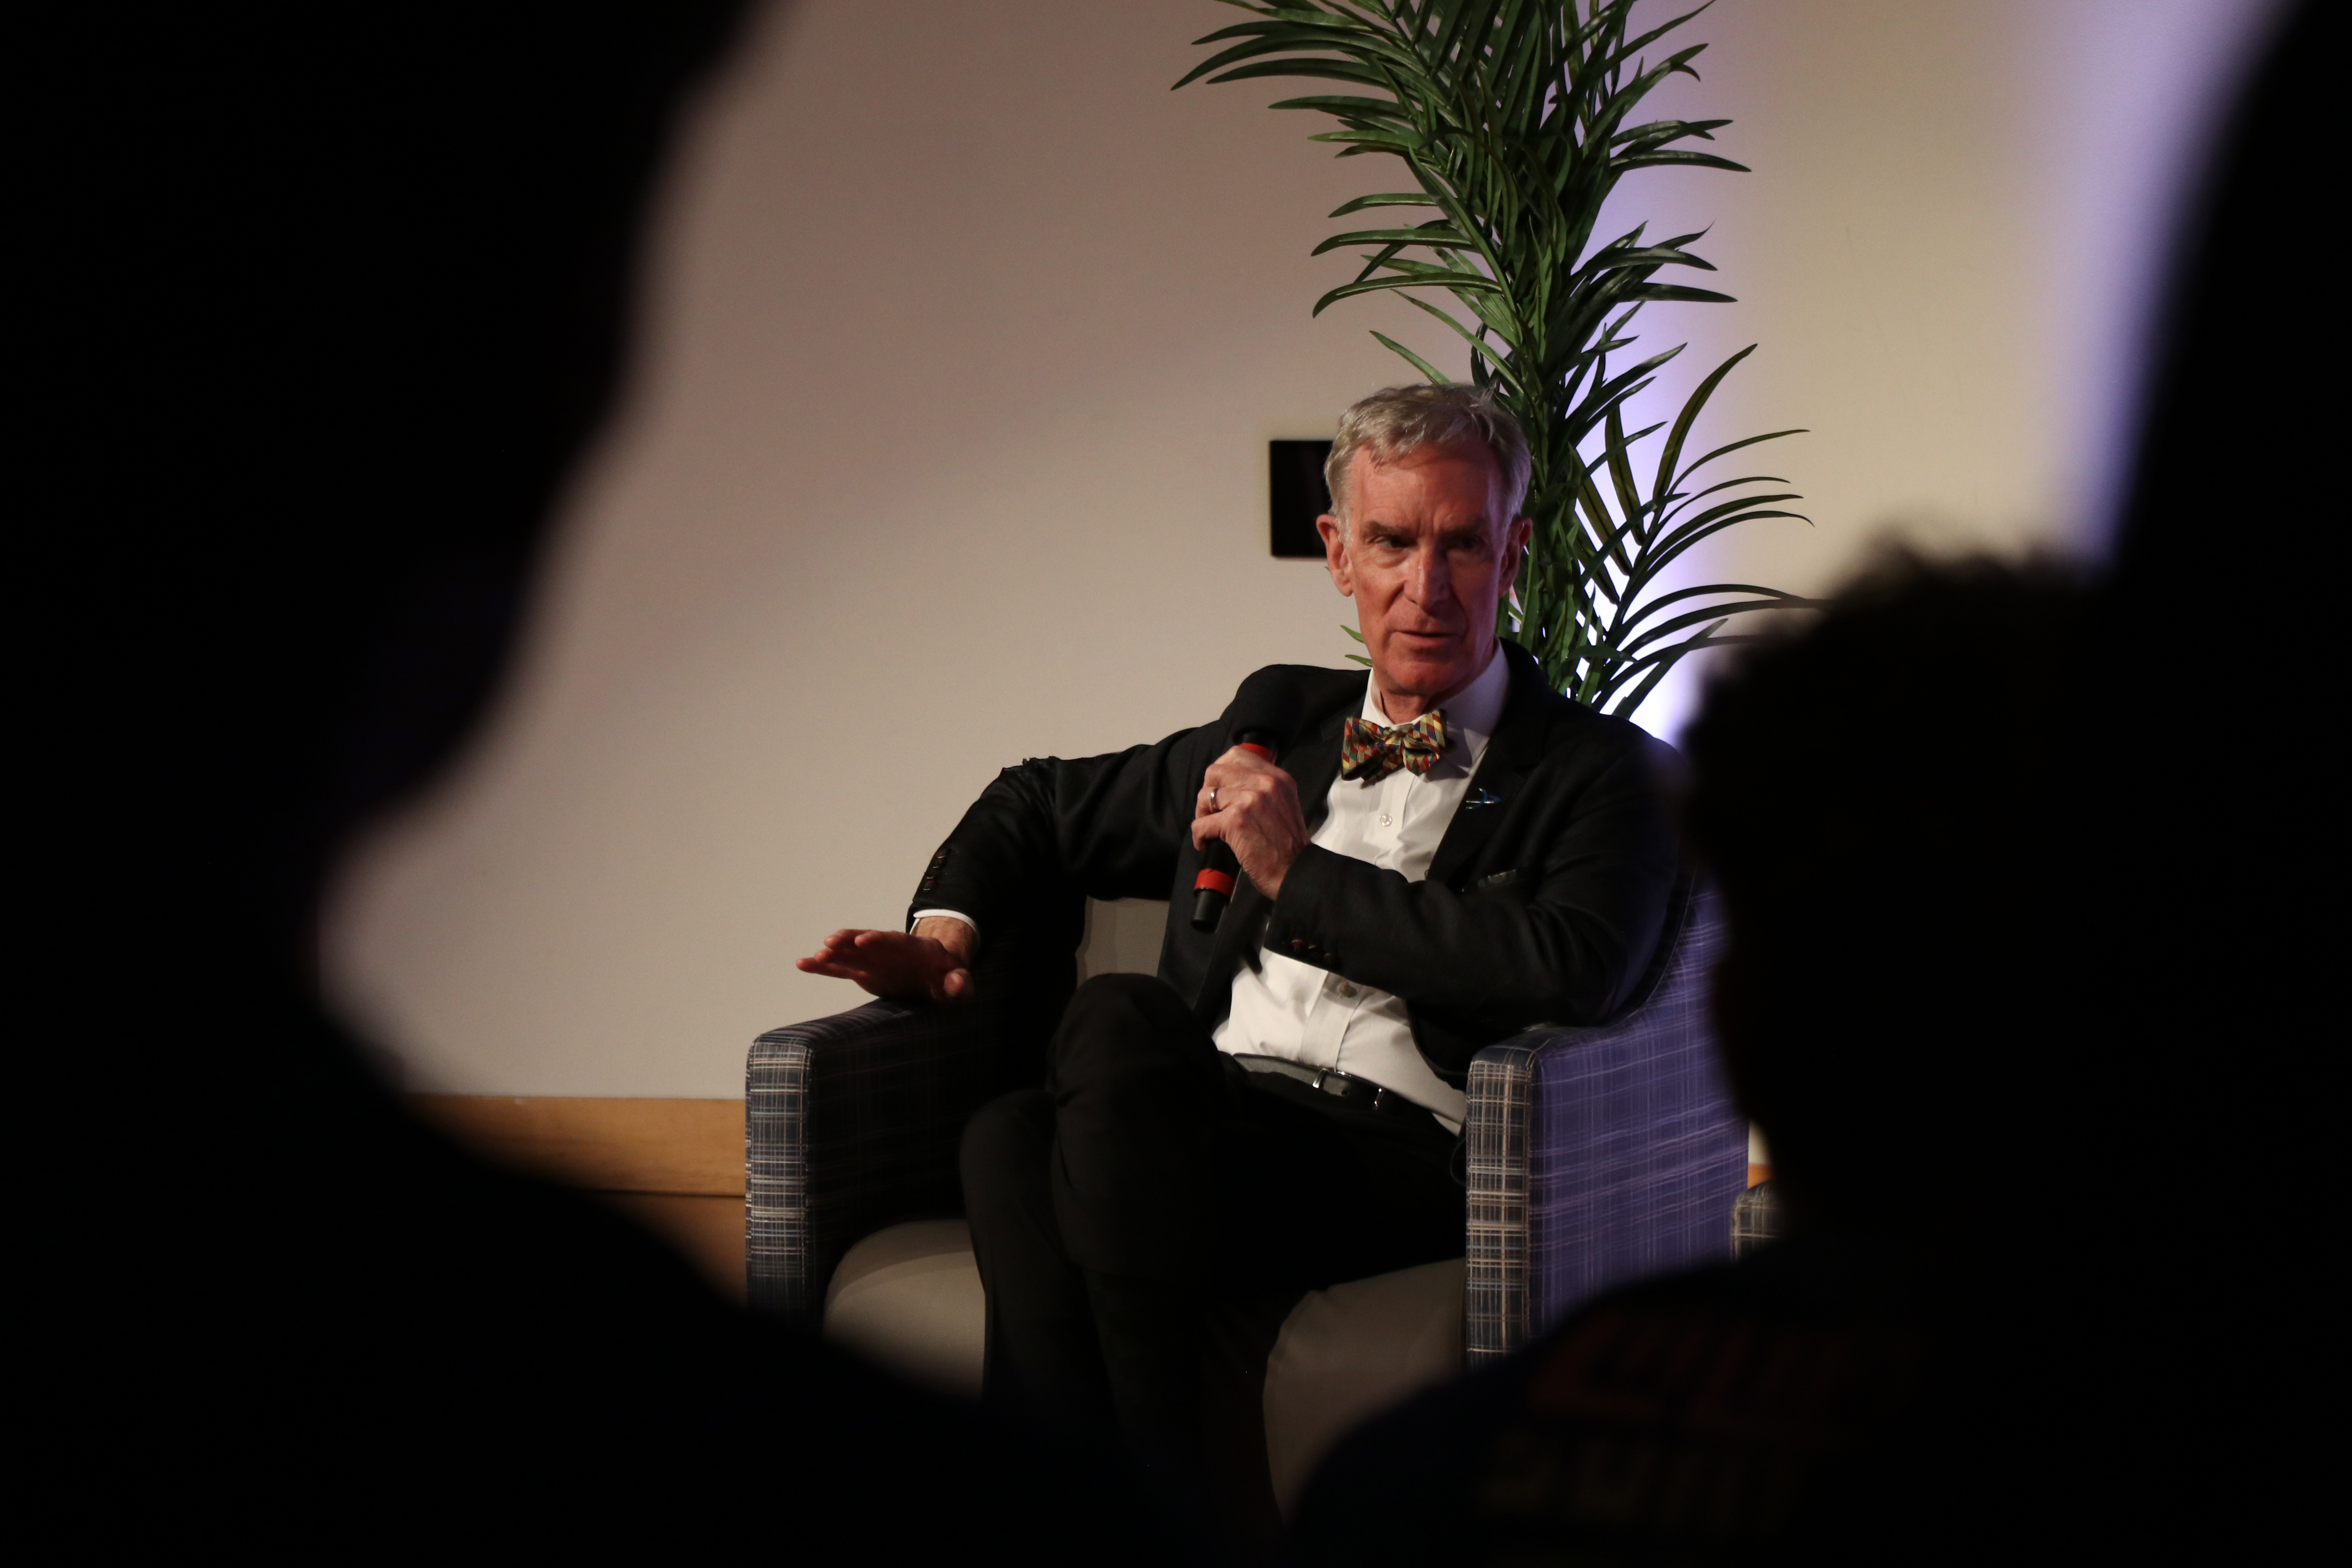 Bill Nye the Science Guy visits CMU for Carnival